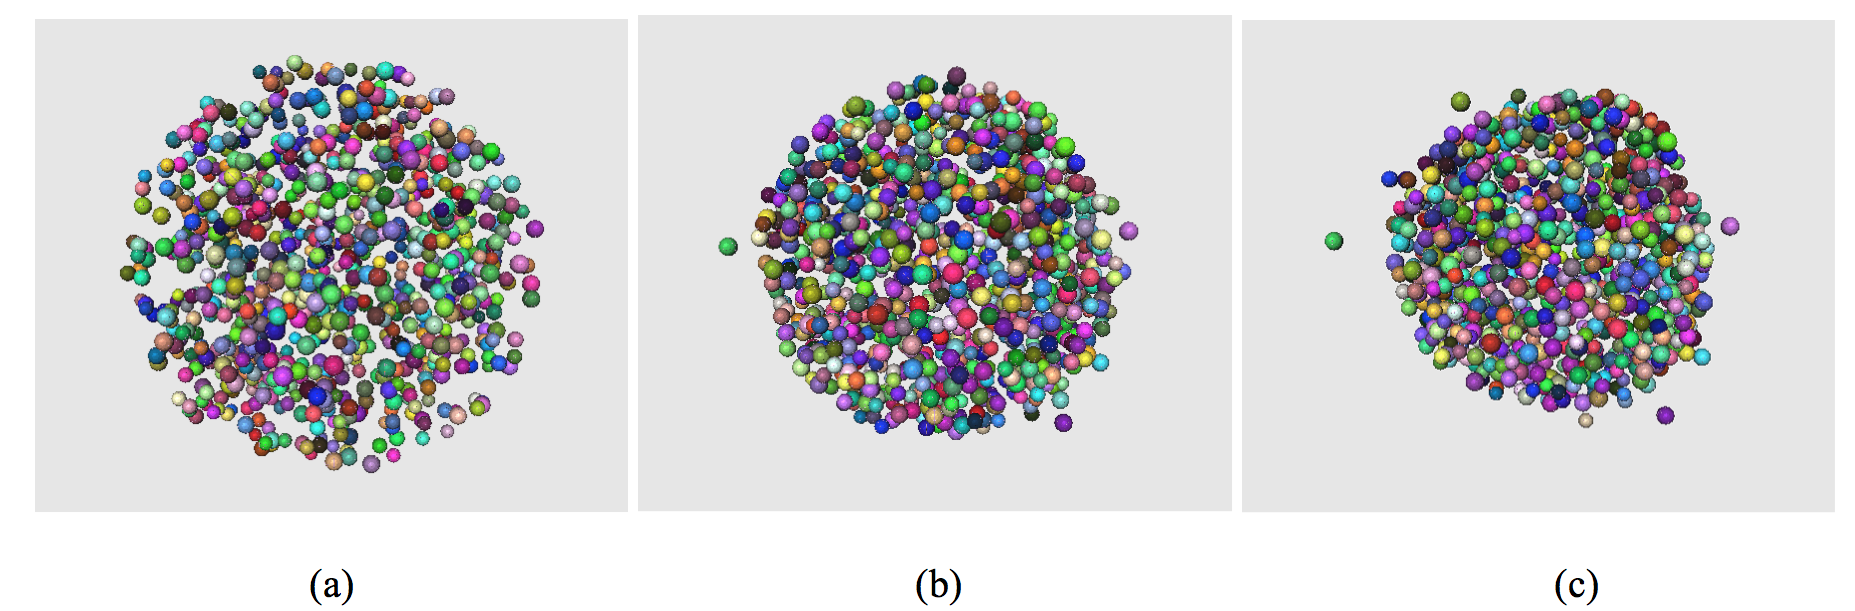 (a) 962 cells generated without forces (defined as 3DCellPopulation.xml in the following studies), (b) 989 cells generated with a force rigidity=0.0007, (c) 989 cells generated with a force rigidity=0.002